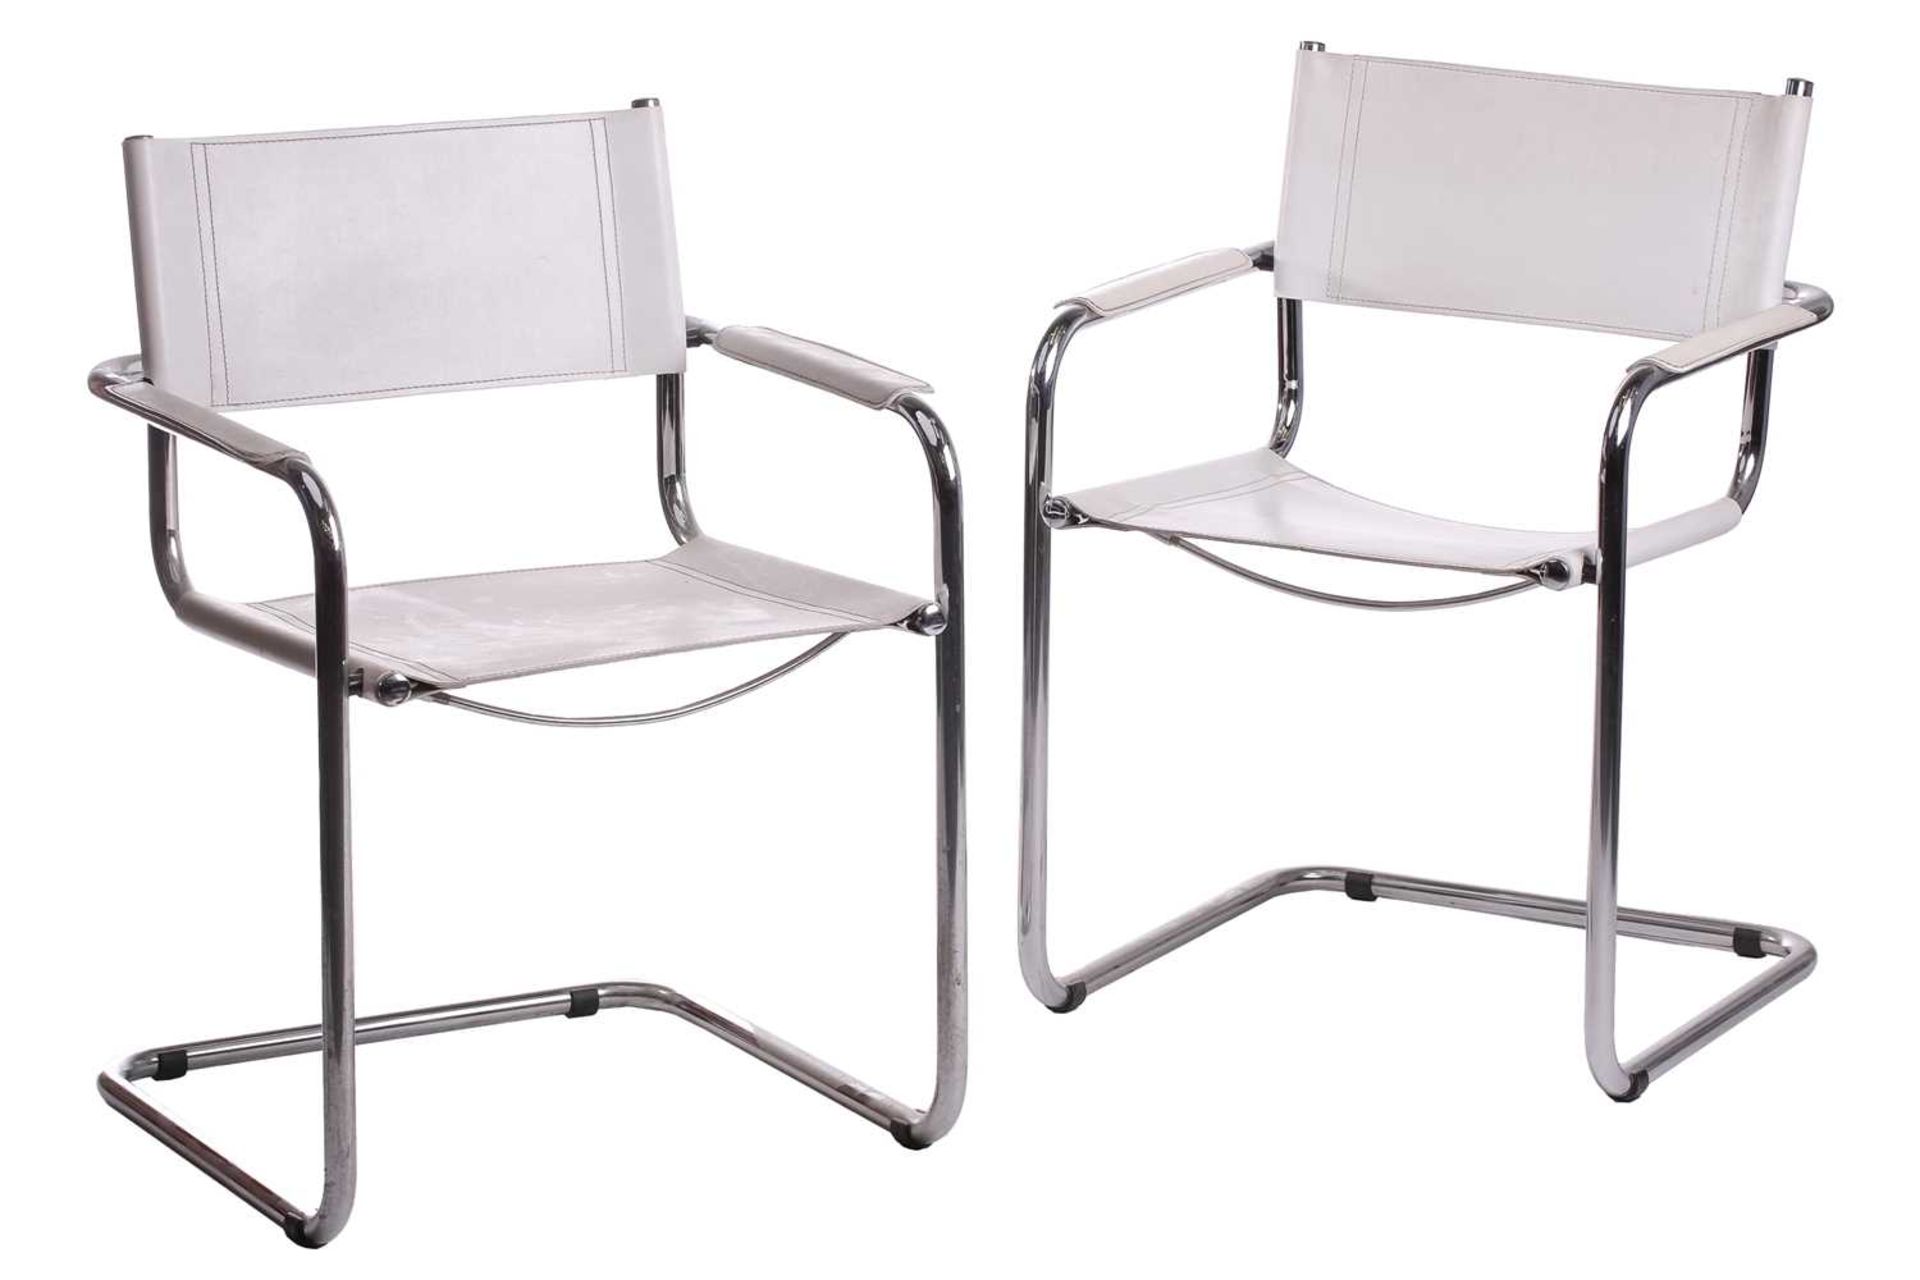 A pair of mid-20th century chrome and white leather cantilever armchair after a design by Marcel